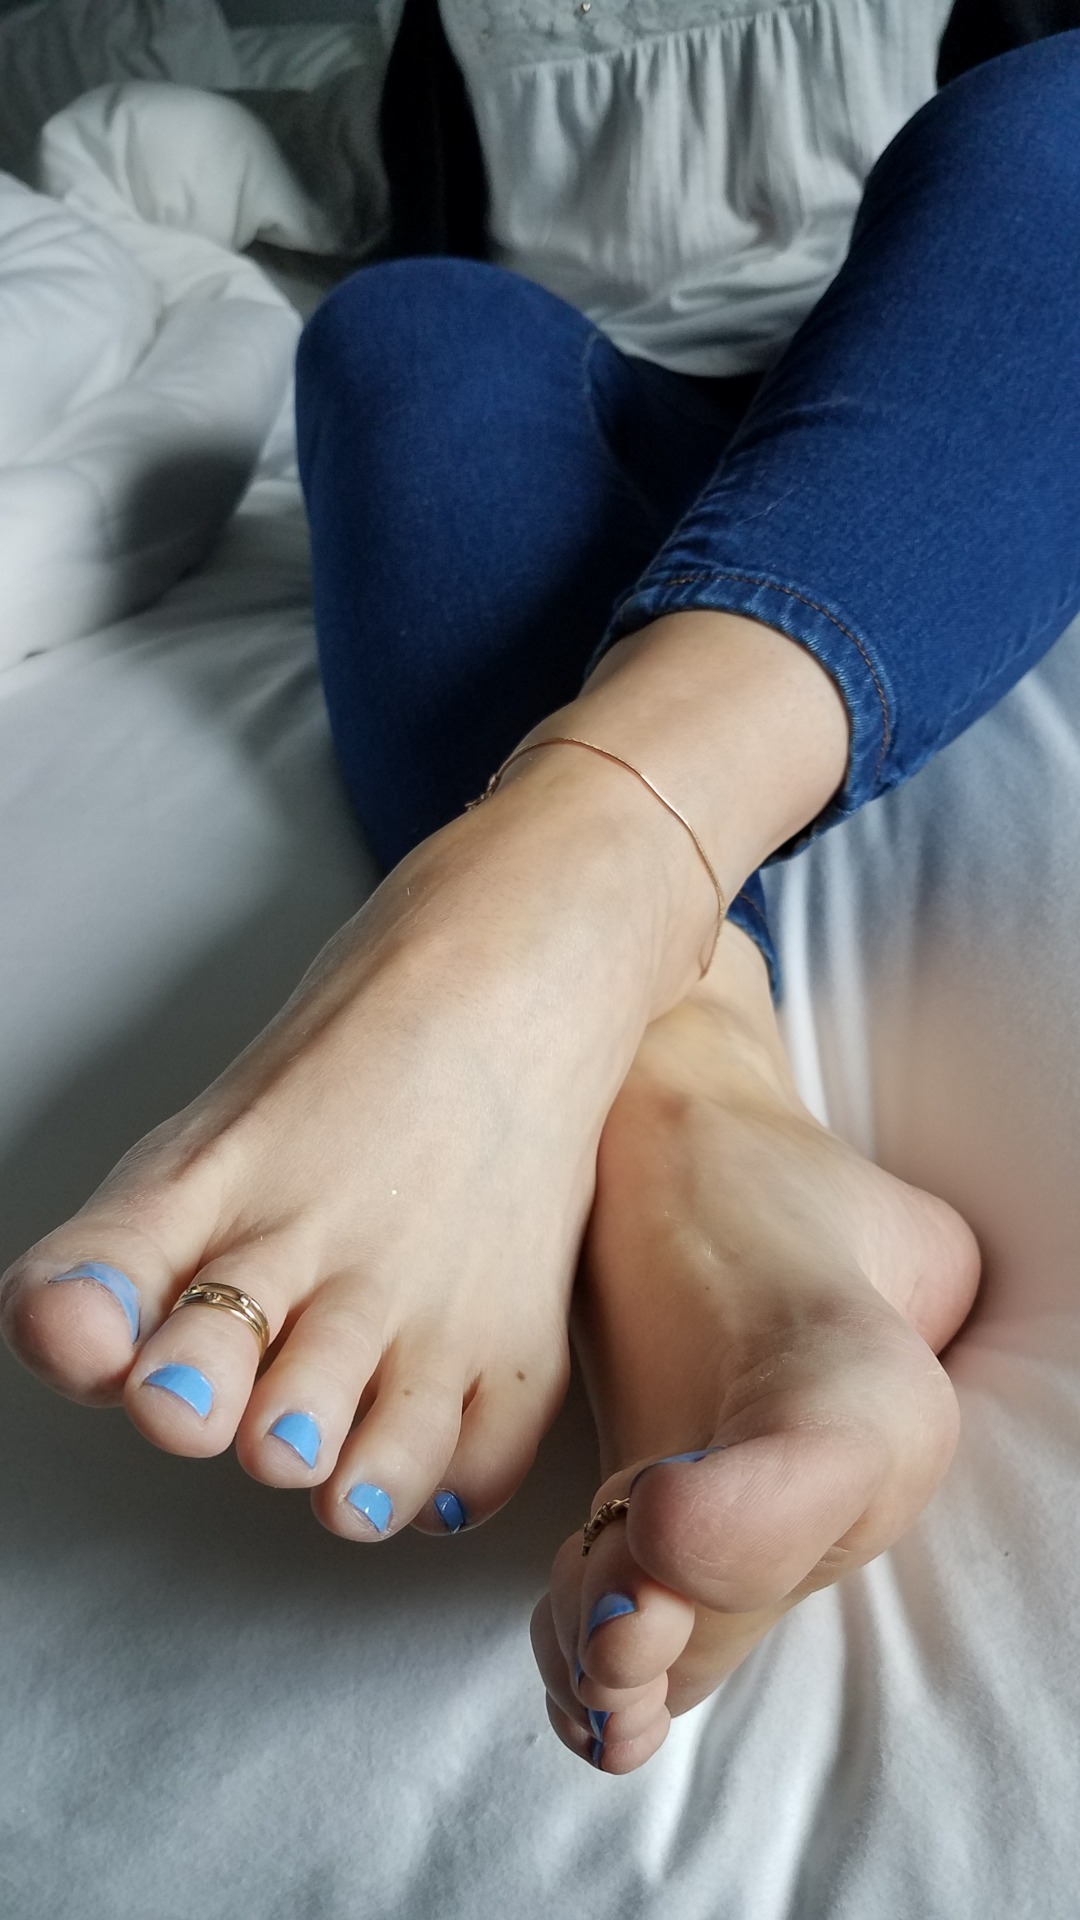 myprettywifesfeet:A delicious close up of her beautiful feet and toes. please comment